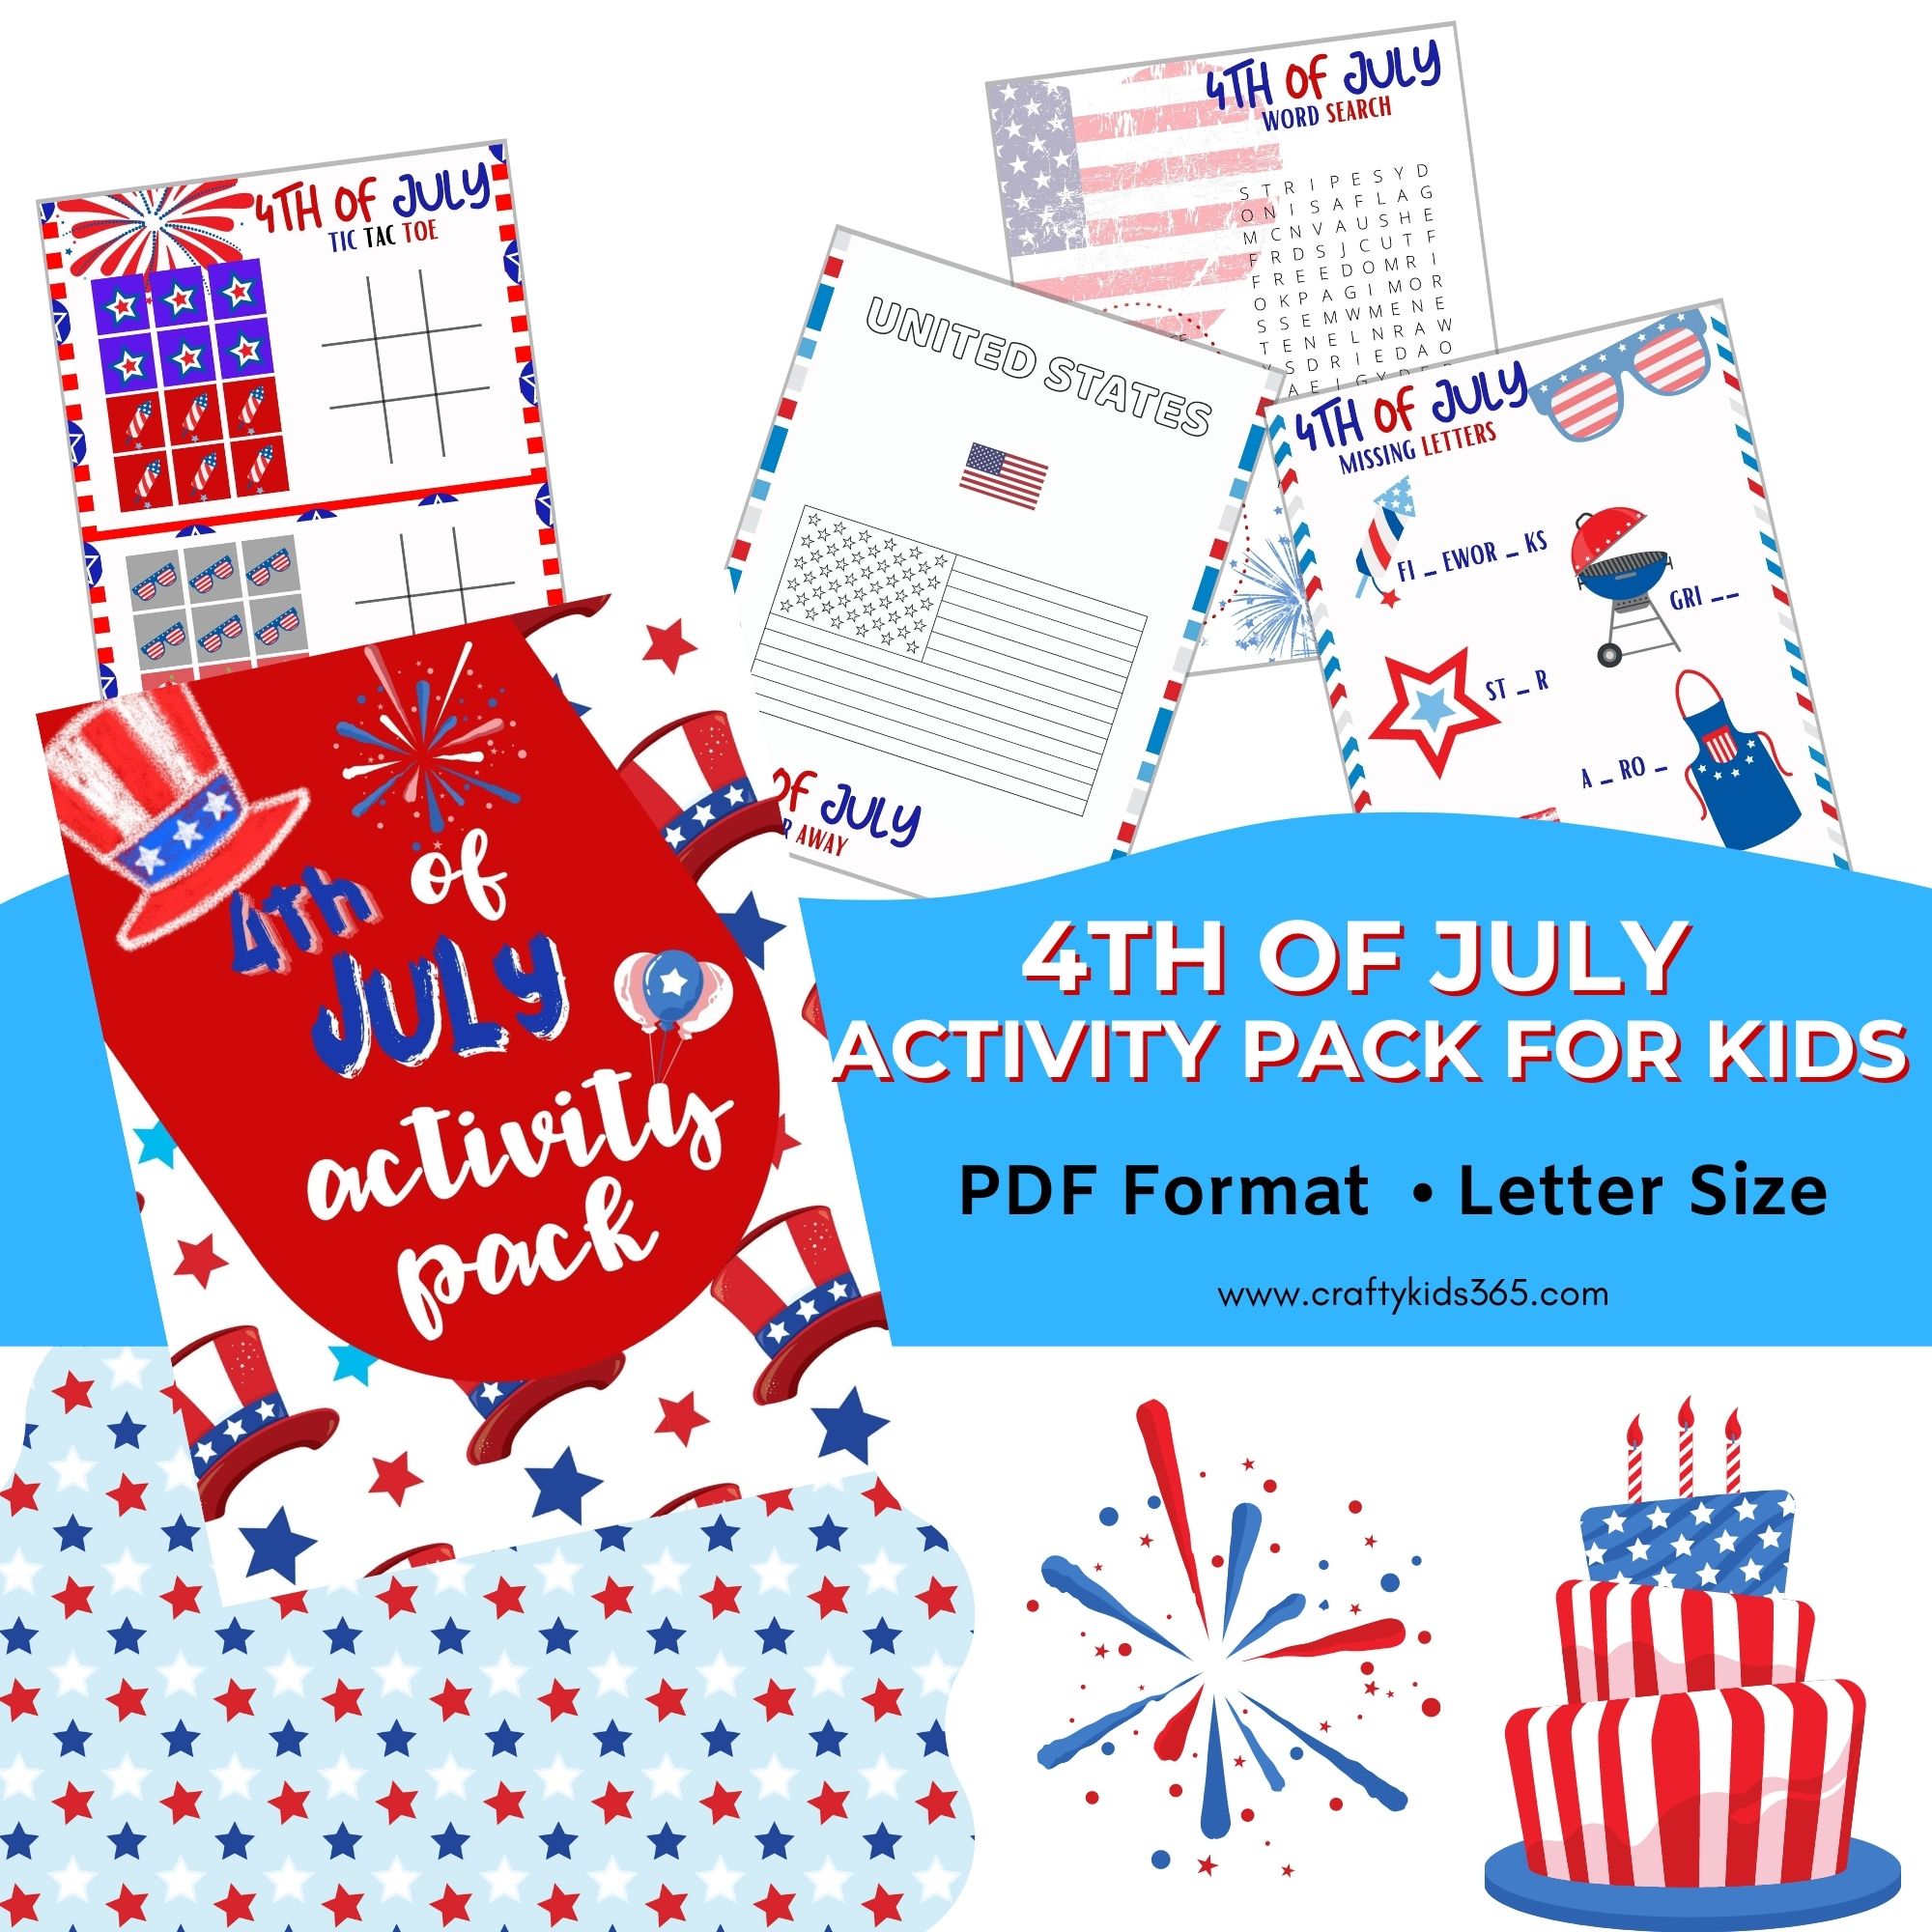 4th of July Activities for kids